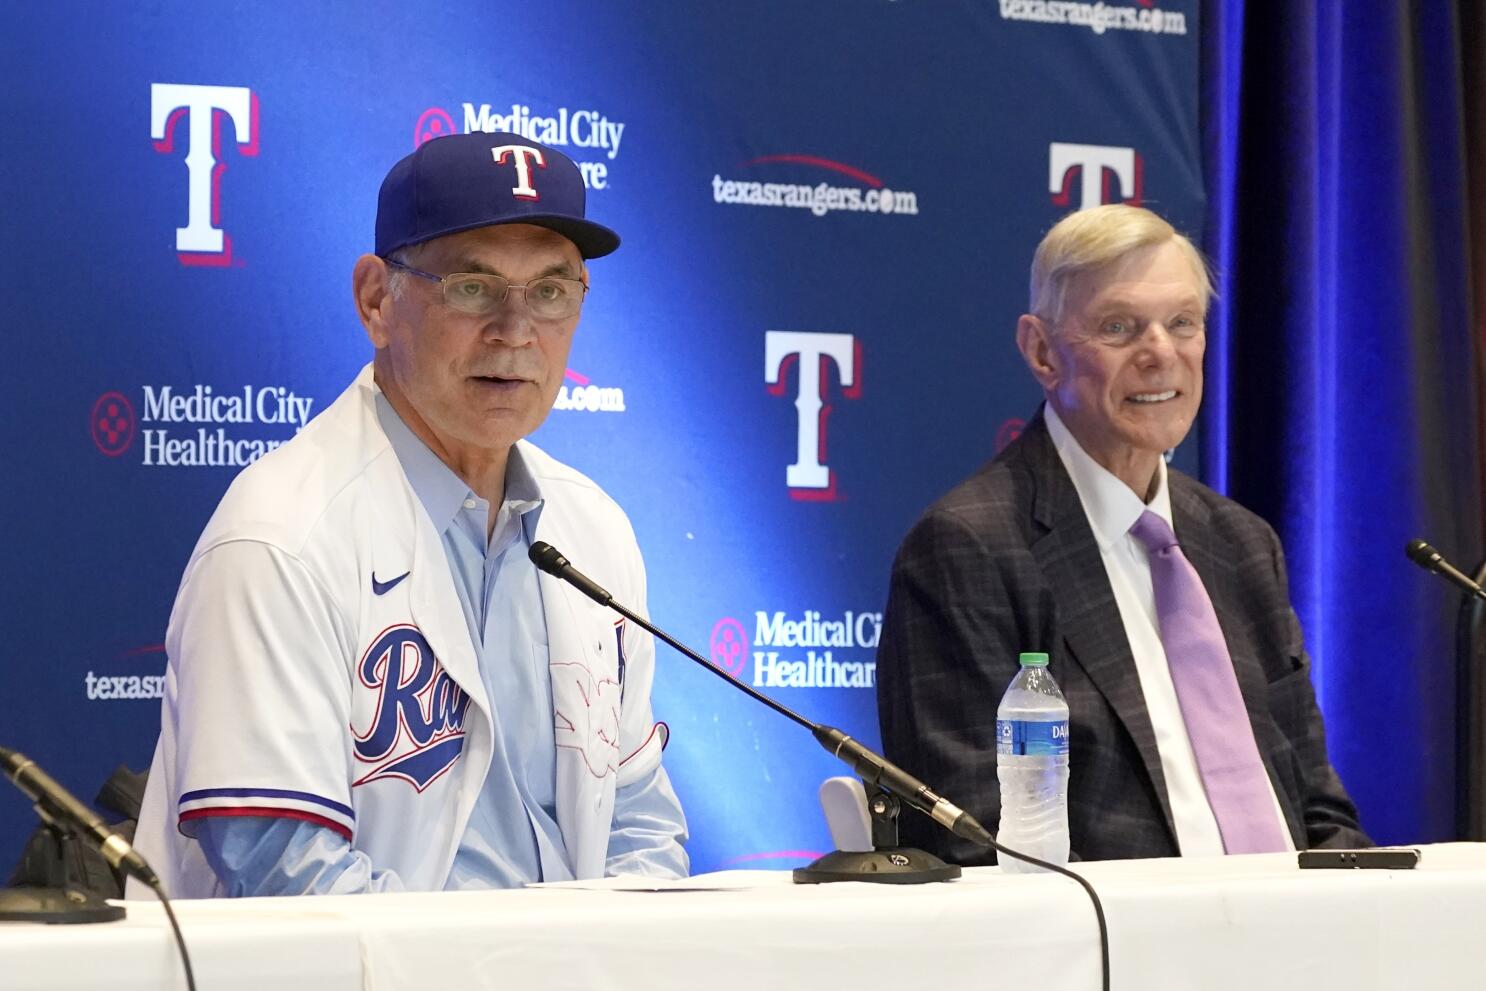 jacob degrom rangers press conference